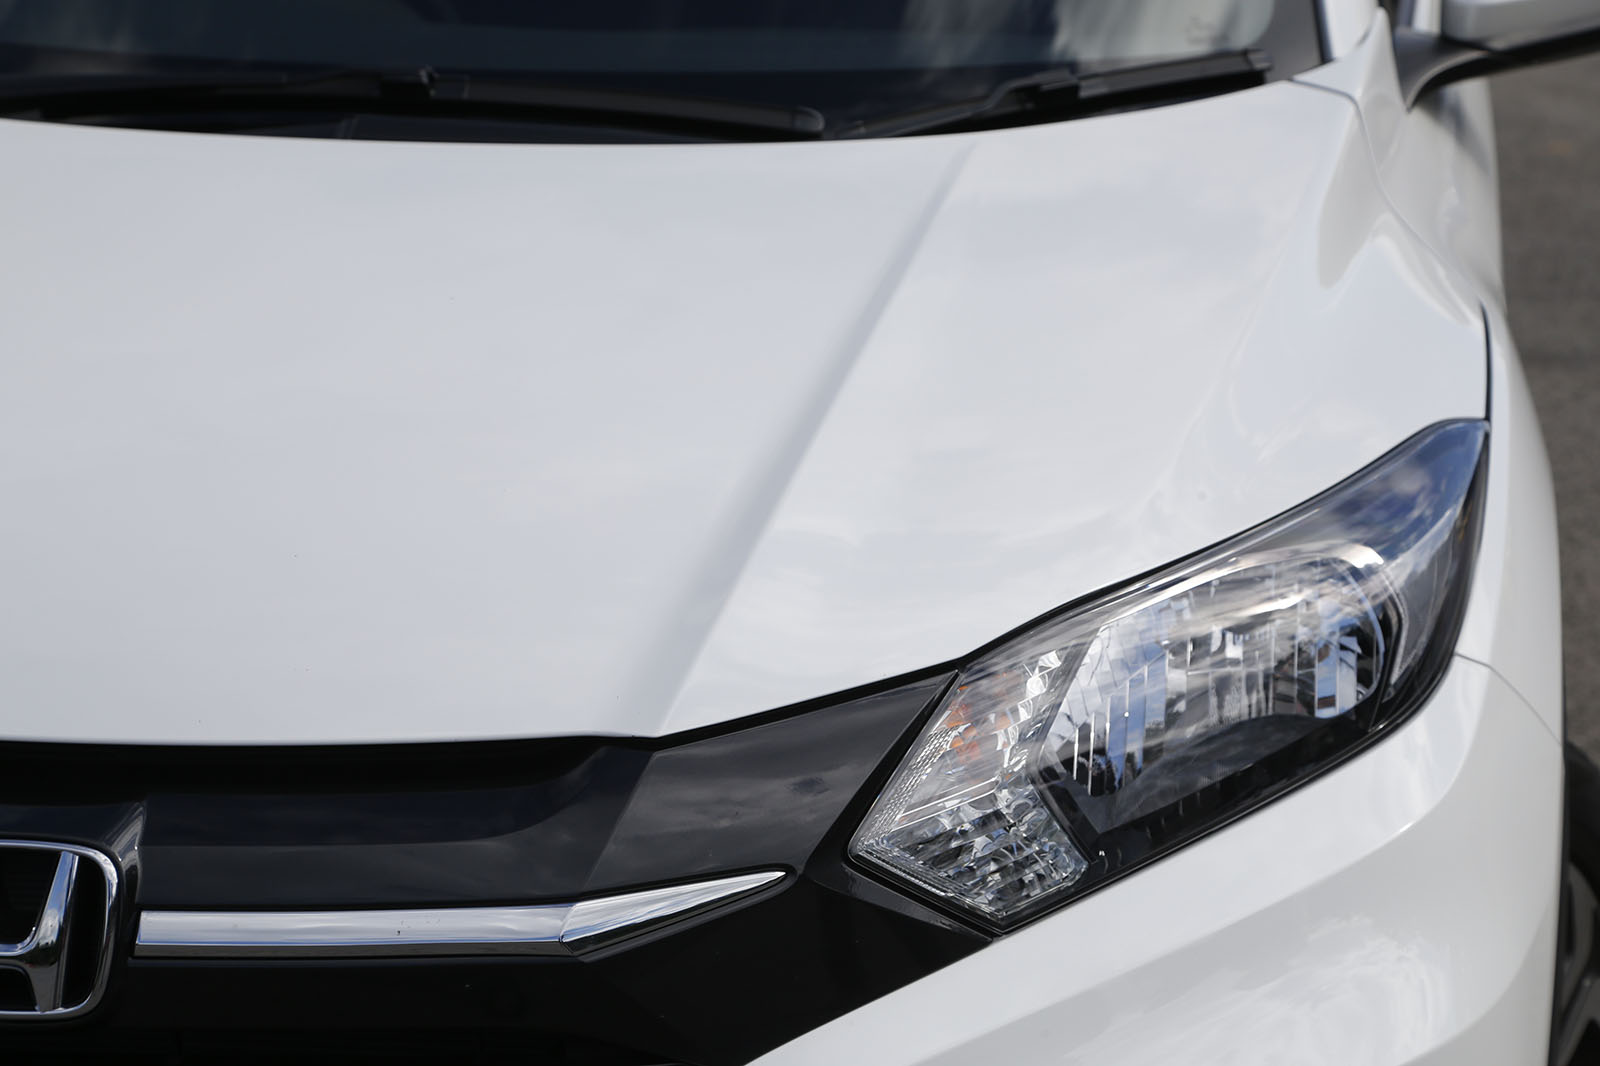 The purposeful Hond-esque grille on the HR-V